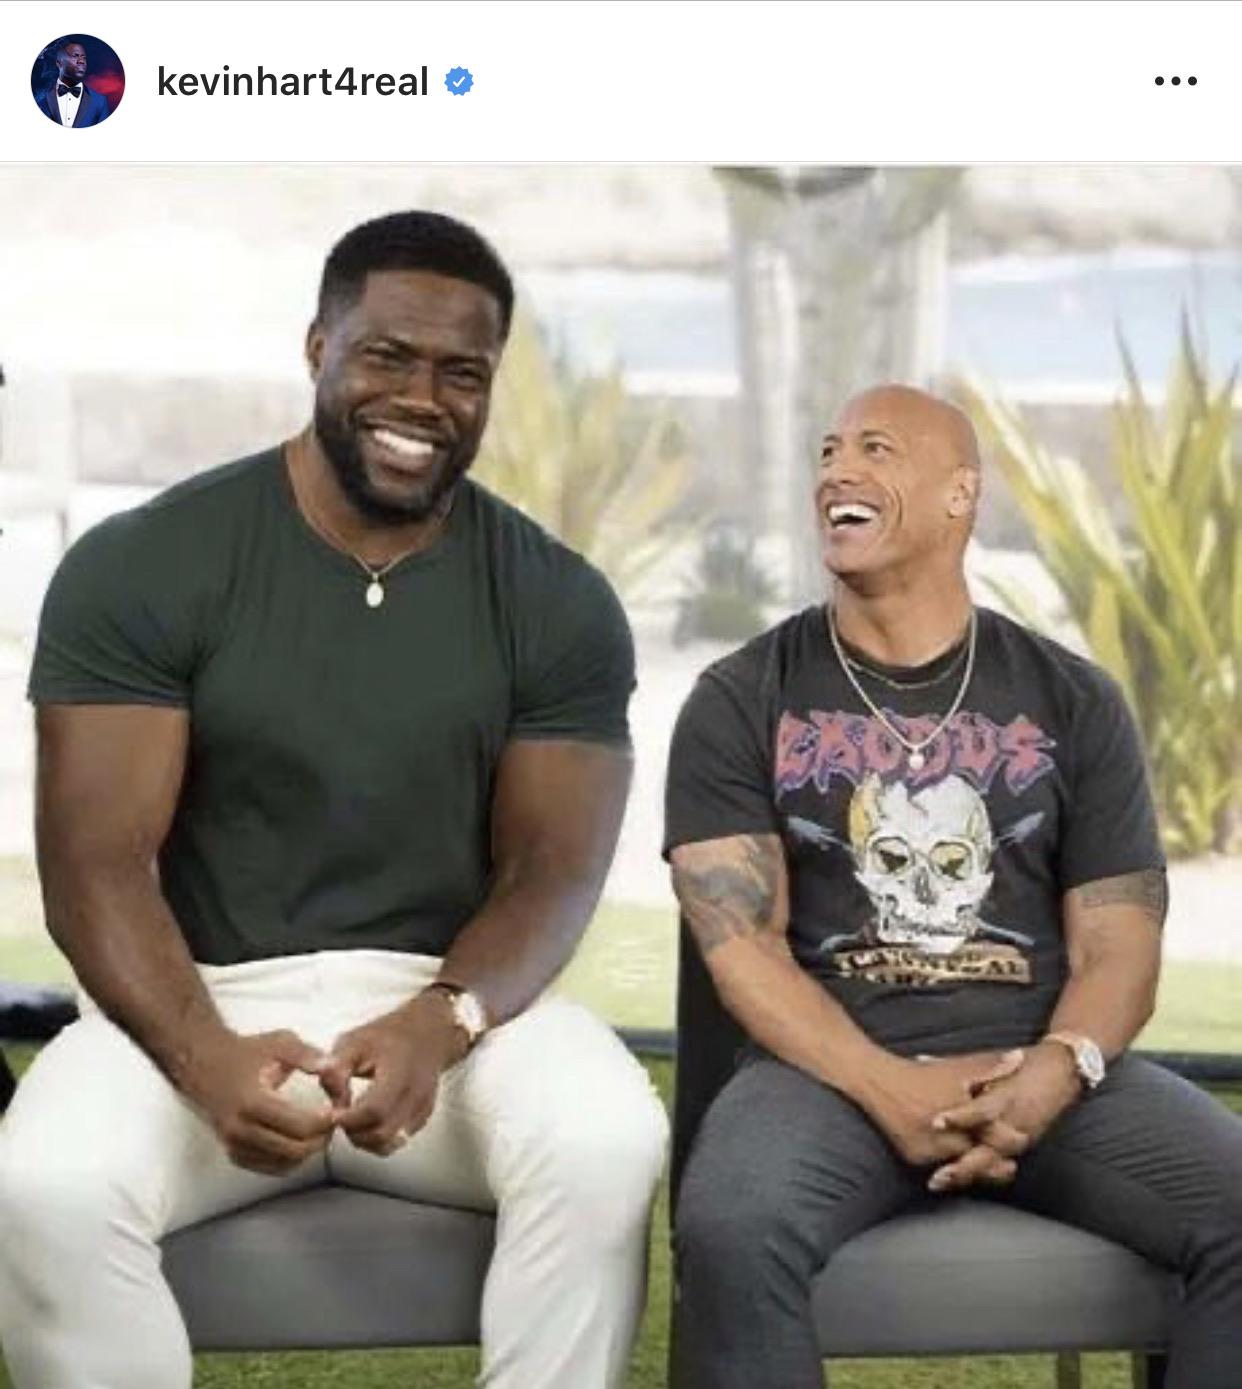 Understand Kev & the Rock are very good buds so much so Kev loves to prank the Rock.